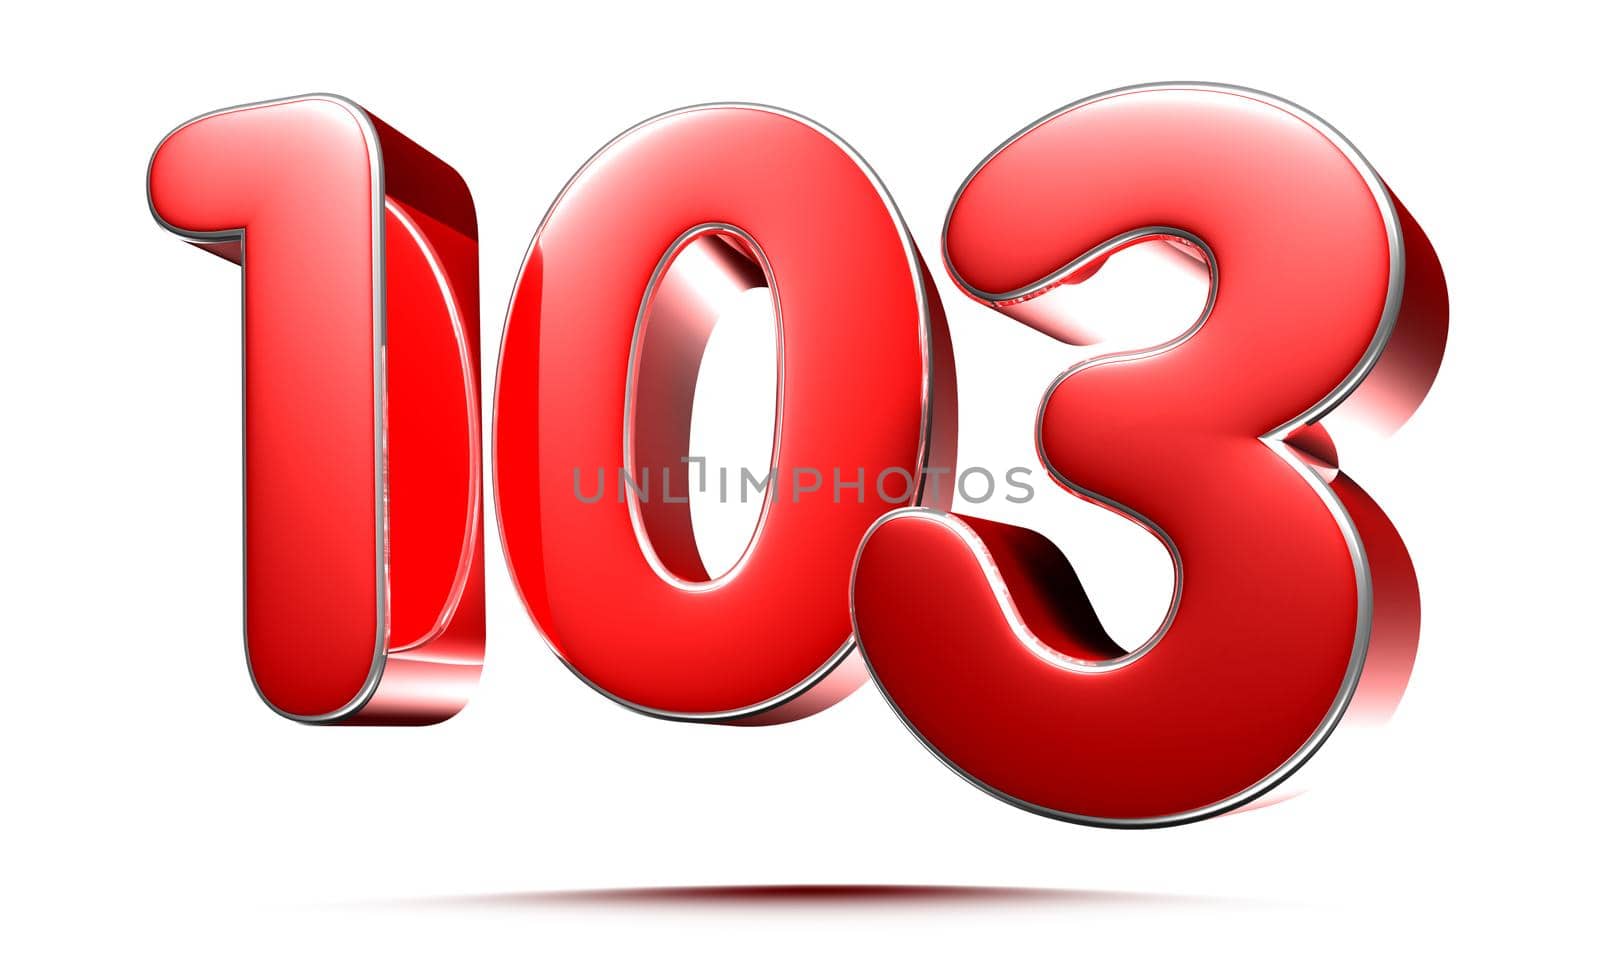 Rounded red numbers 103 on white background 3D illustration with clipping path